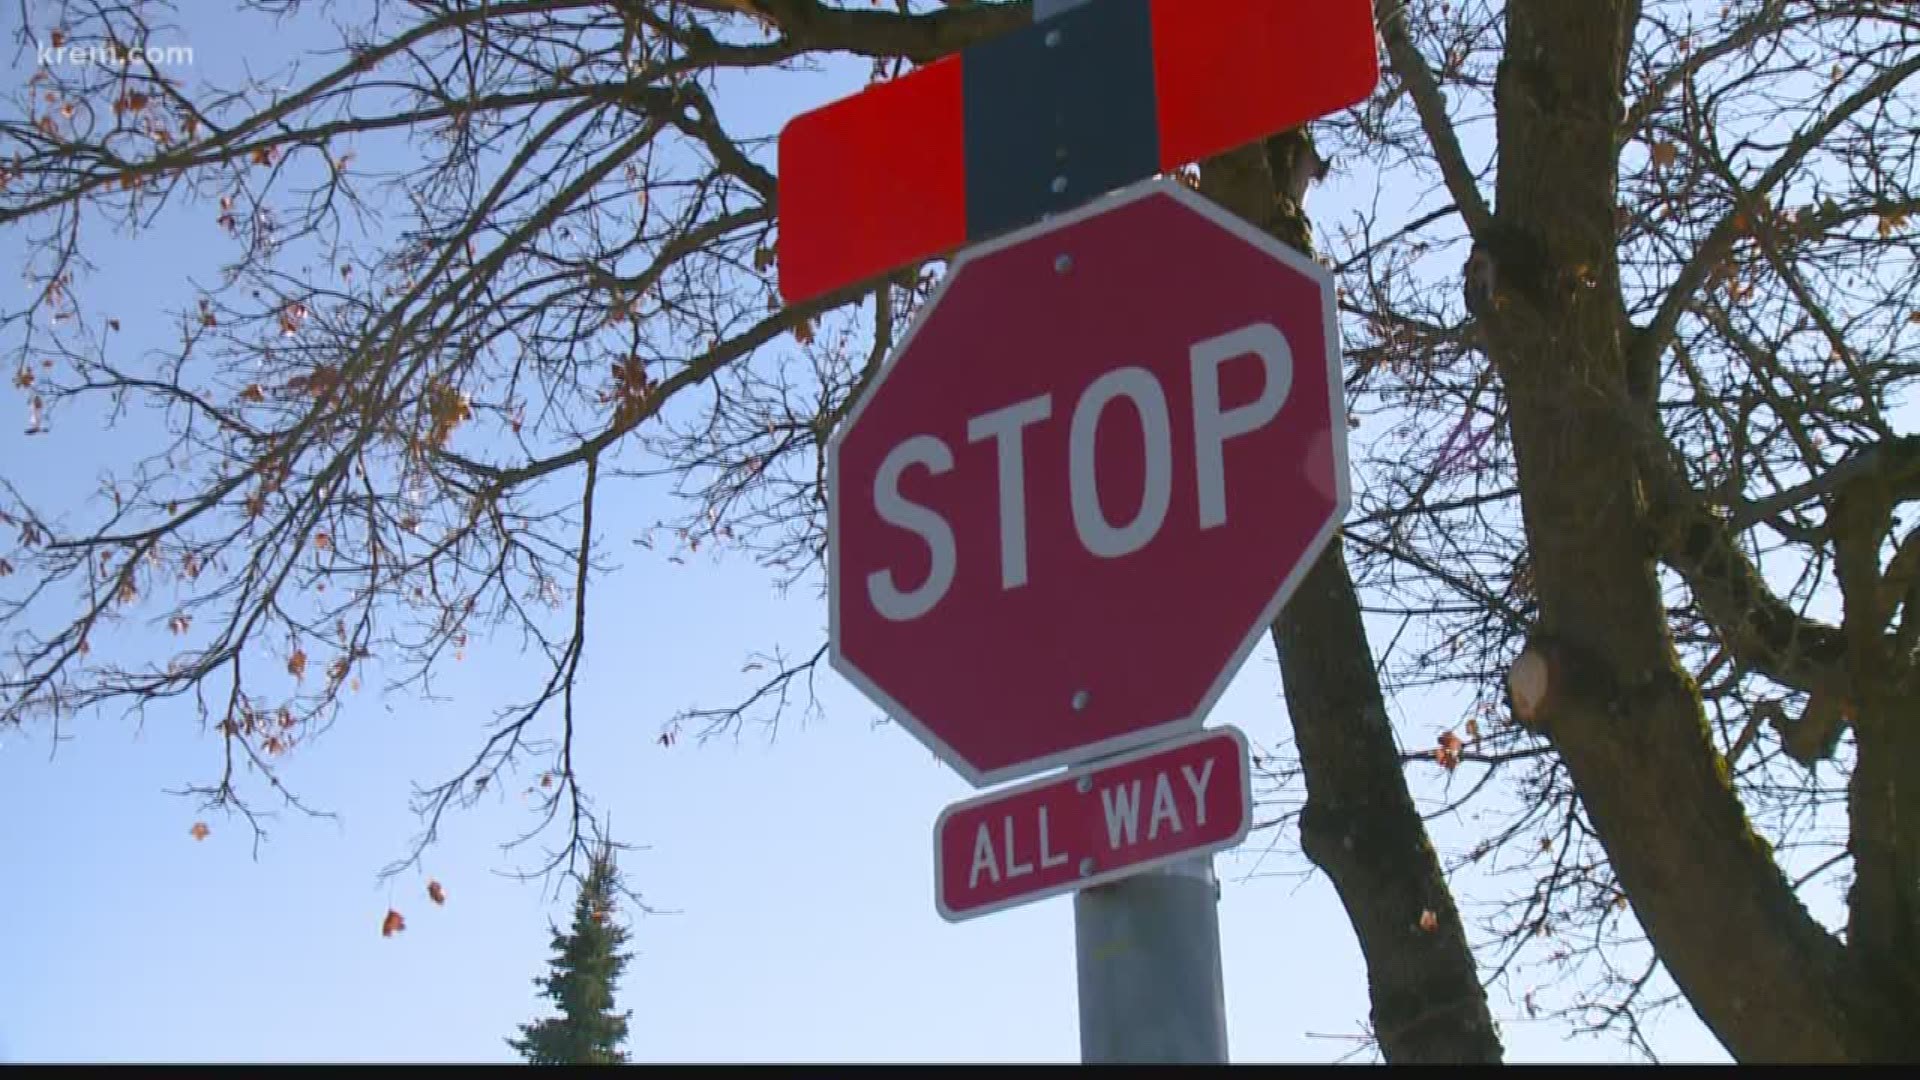 This stop sign is tripping up many people on Spokane's South Hill. The High Drive and Grand Boulevard intersection now requires cars to stop in all directions.